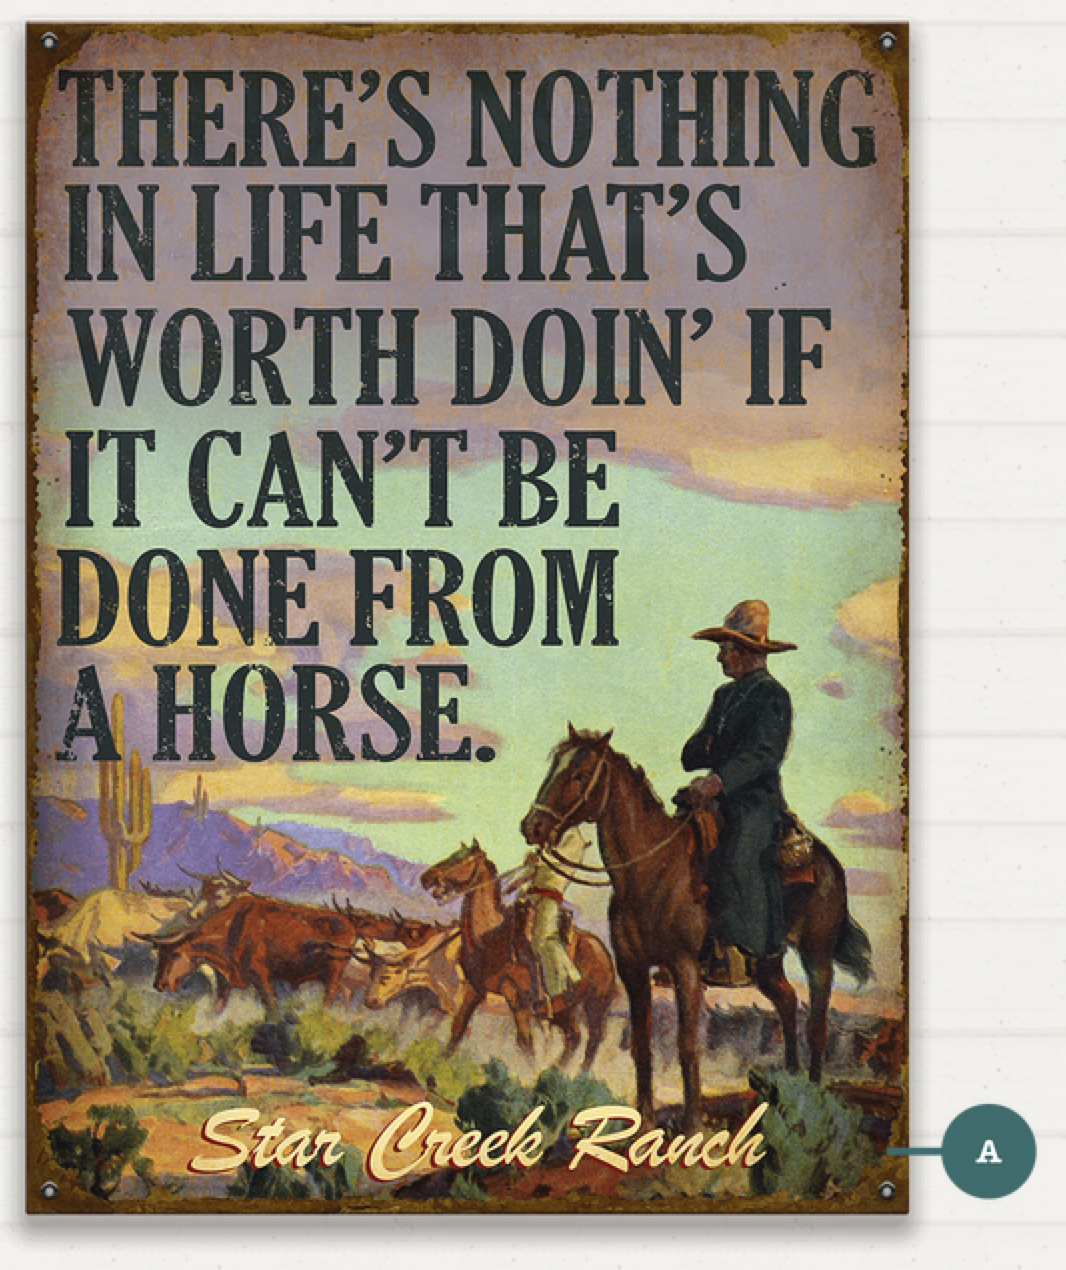 It's Can't be done from A Horse.